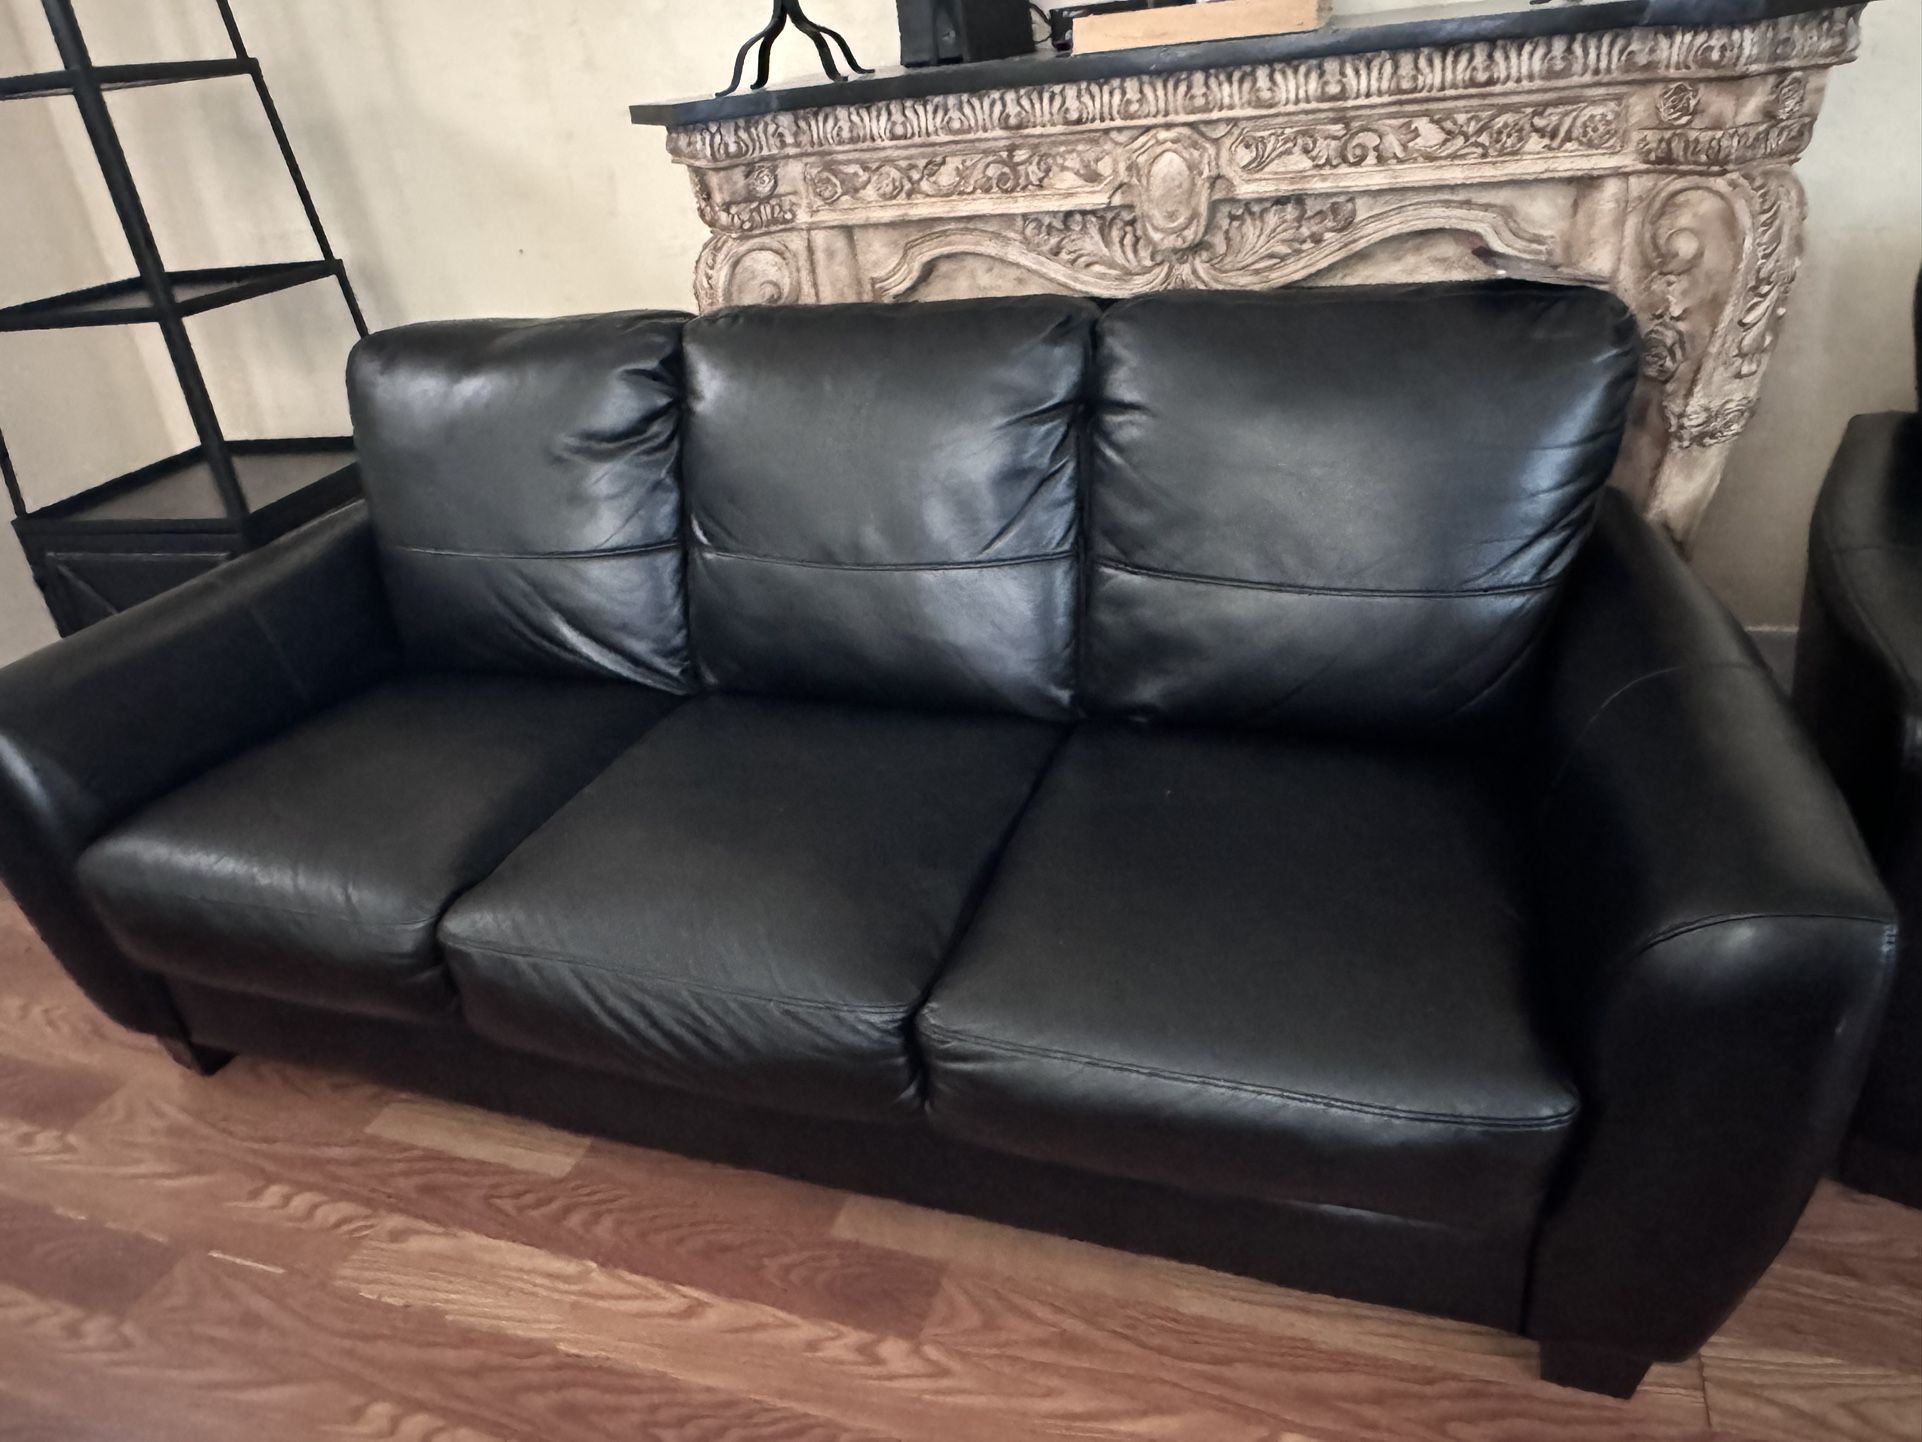 BLACK FAUX LEATHER COUCH SET OF 3